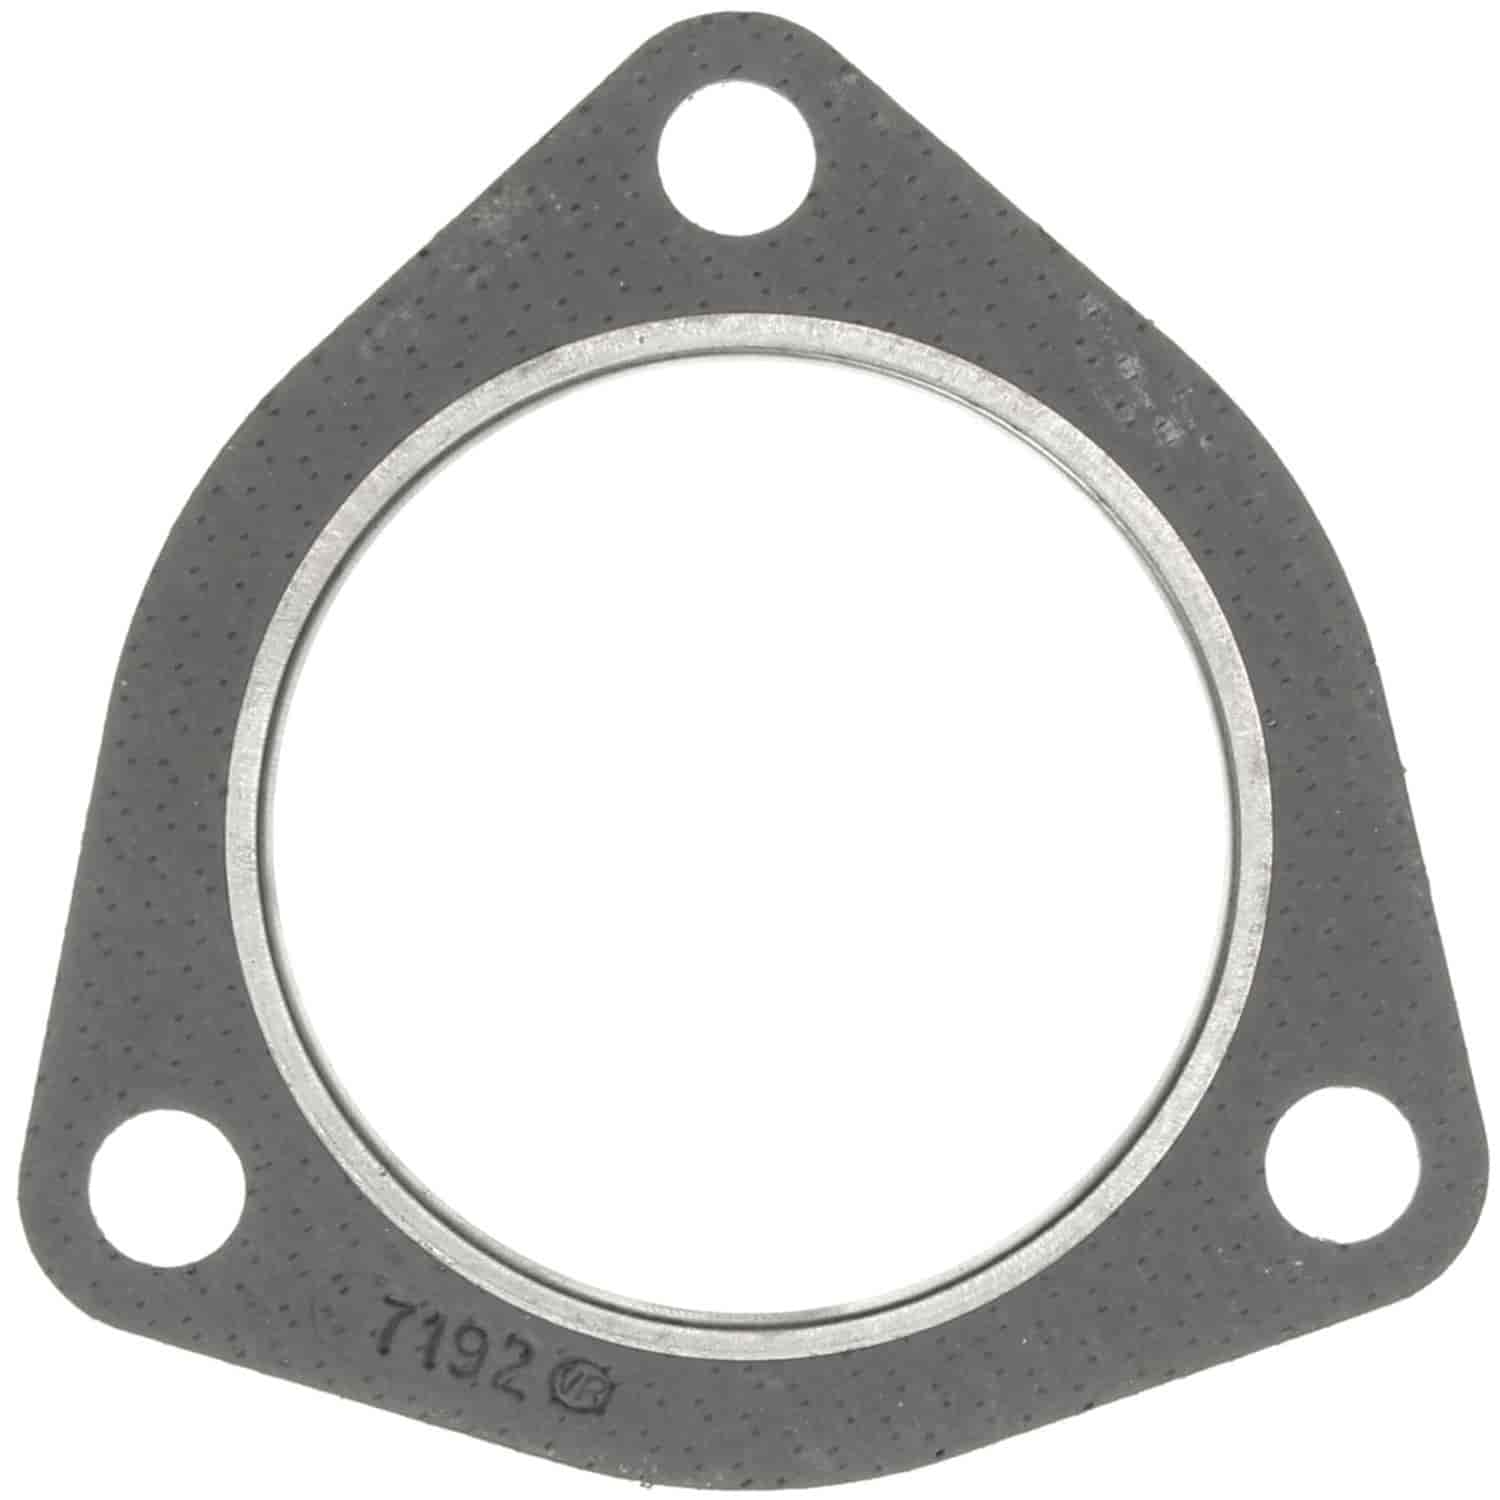 Clevite F7192 Exhaust Pipe Flange Gasket 1953-1987 Chevy 283/307/322